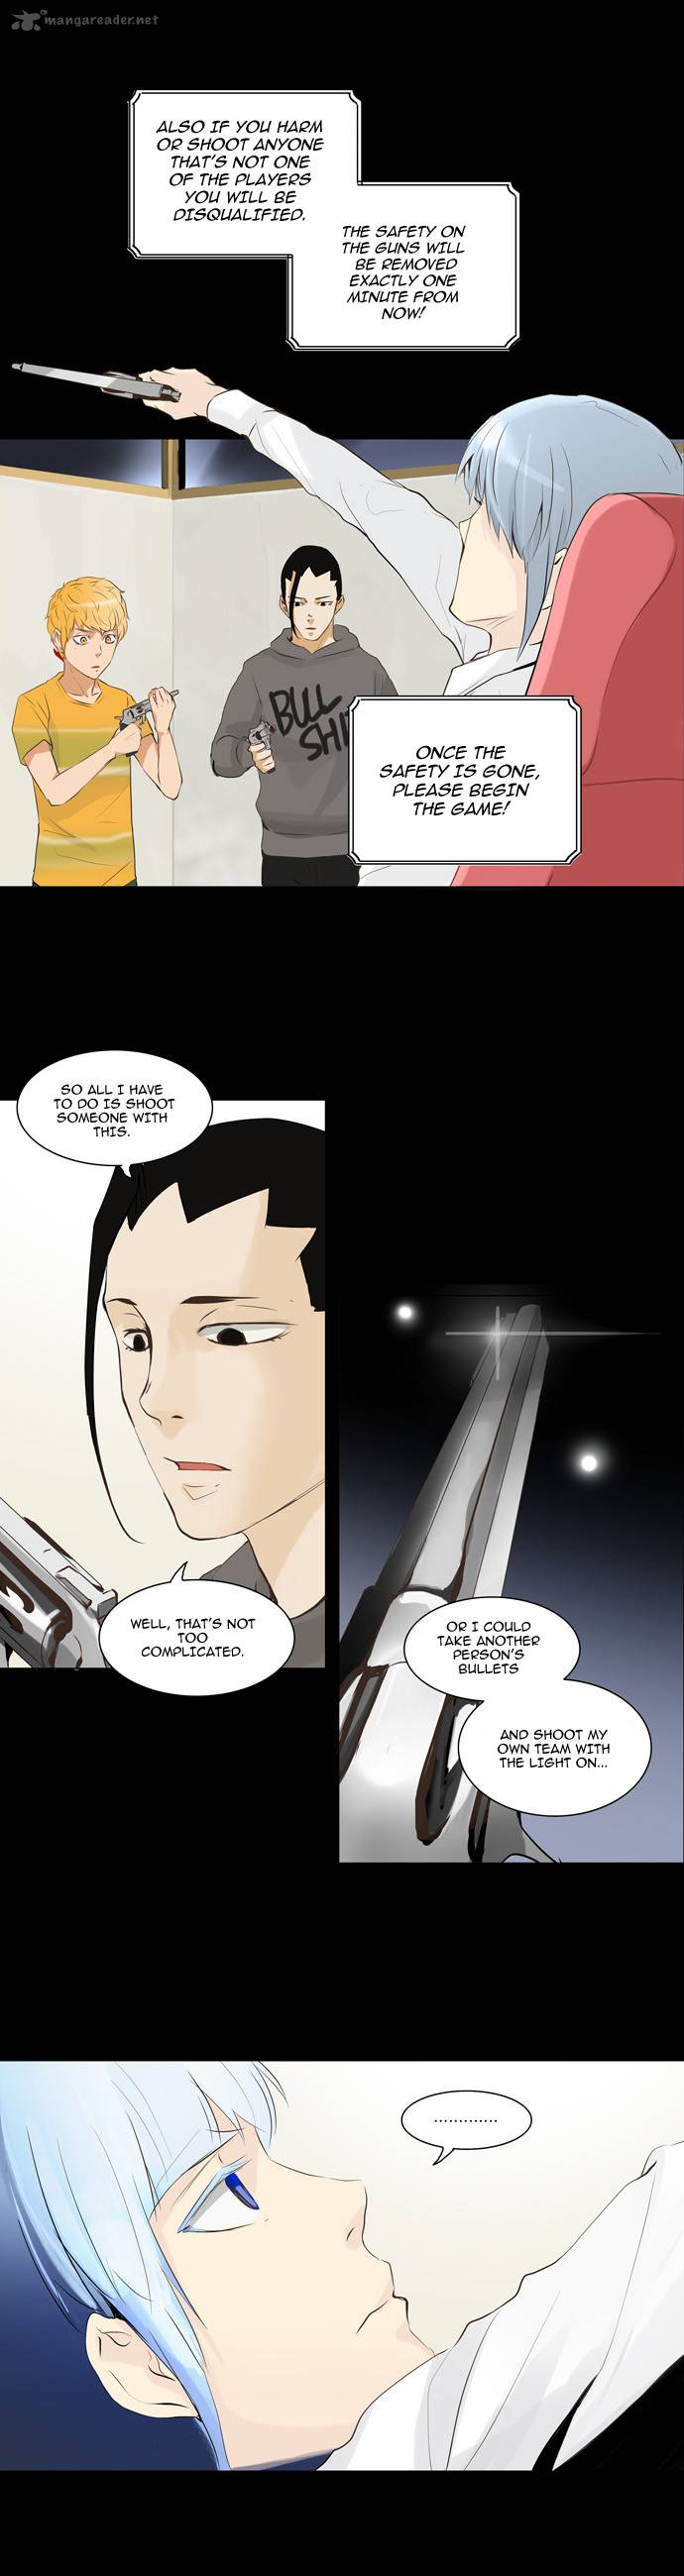 Tower Of God 138 6